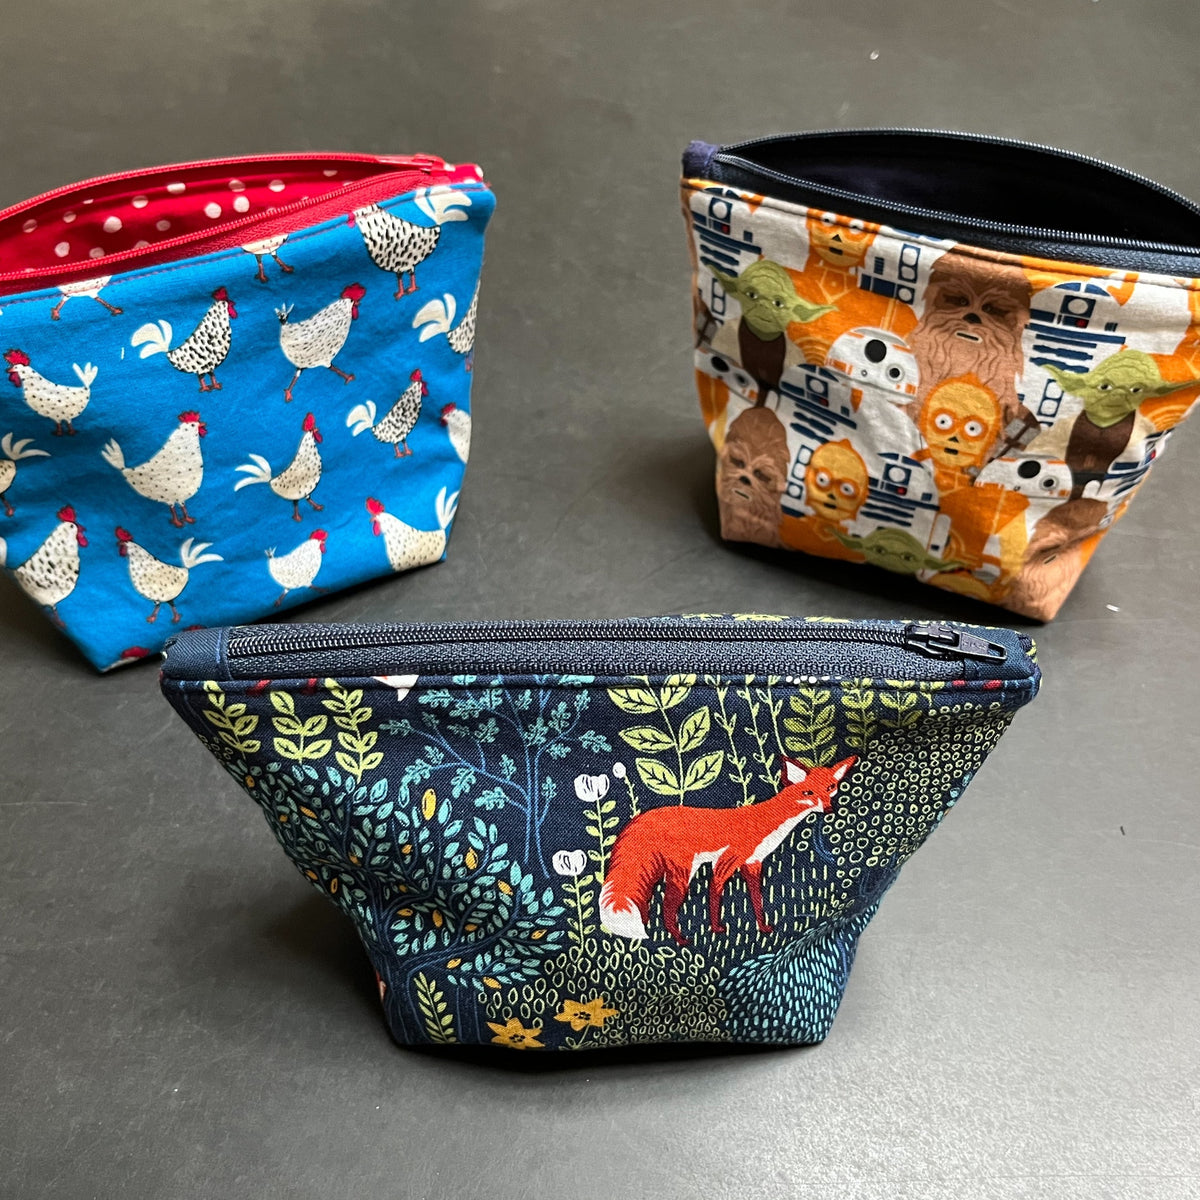 Three examples of zippered box bottom bags. On the left, chickens and roosters on a blue background and lined with red polka dot fabric &amp; a red zipper. On the right, a Star Wars graphic lined with black fabric. In the center front, a woodland theme with pretty green foliage and a red fox. 